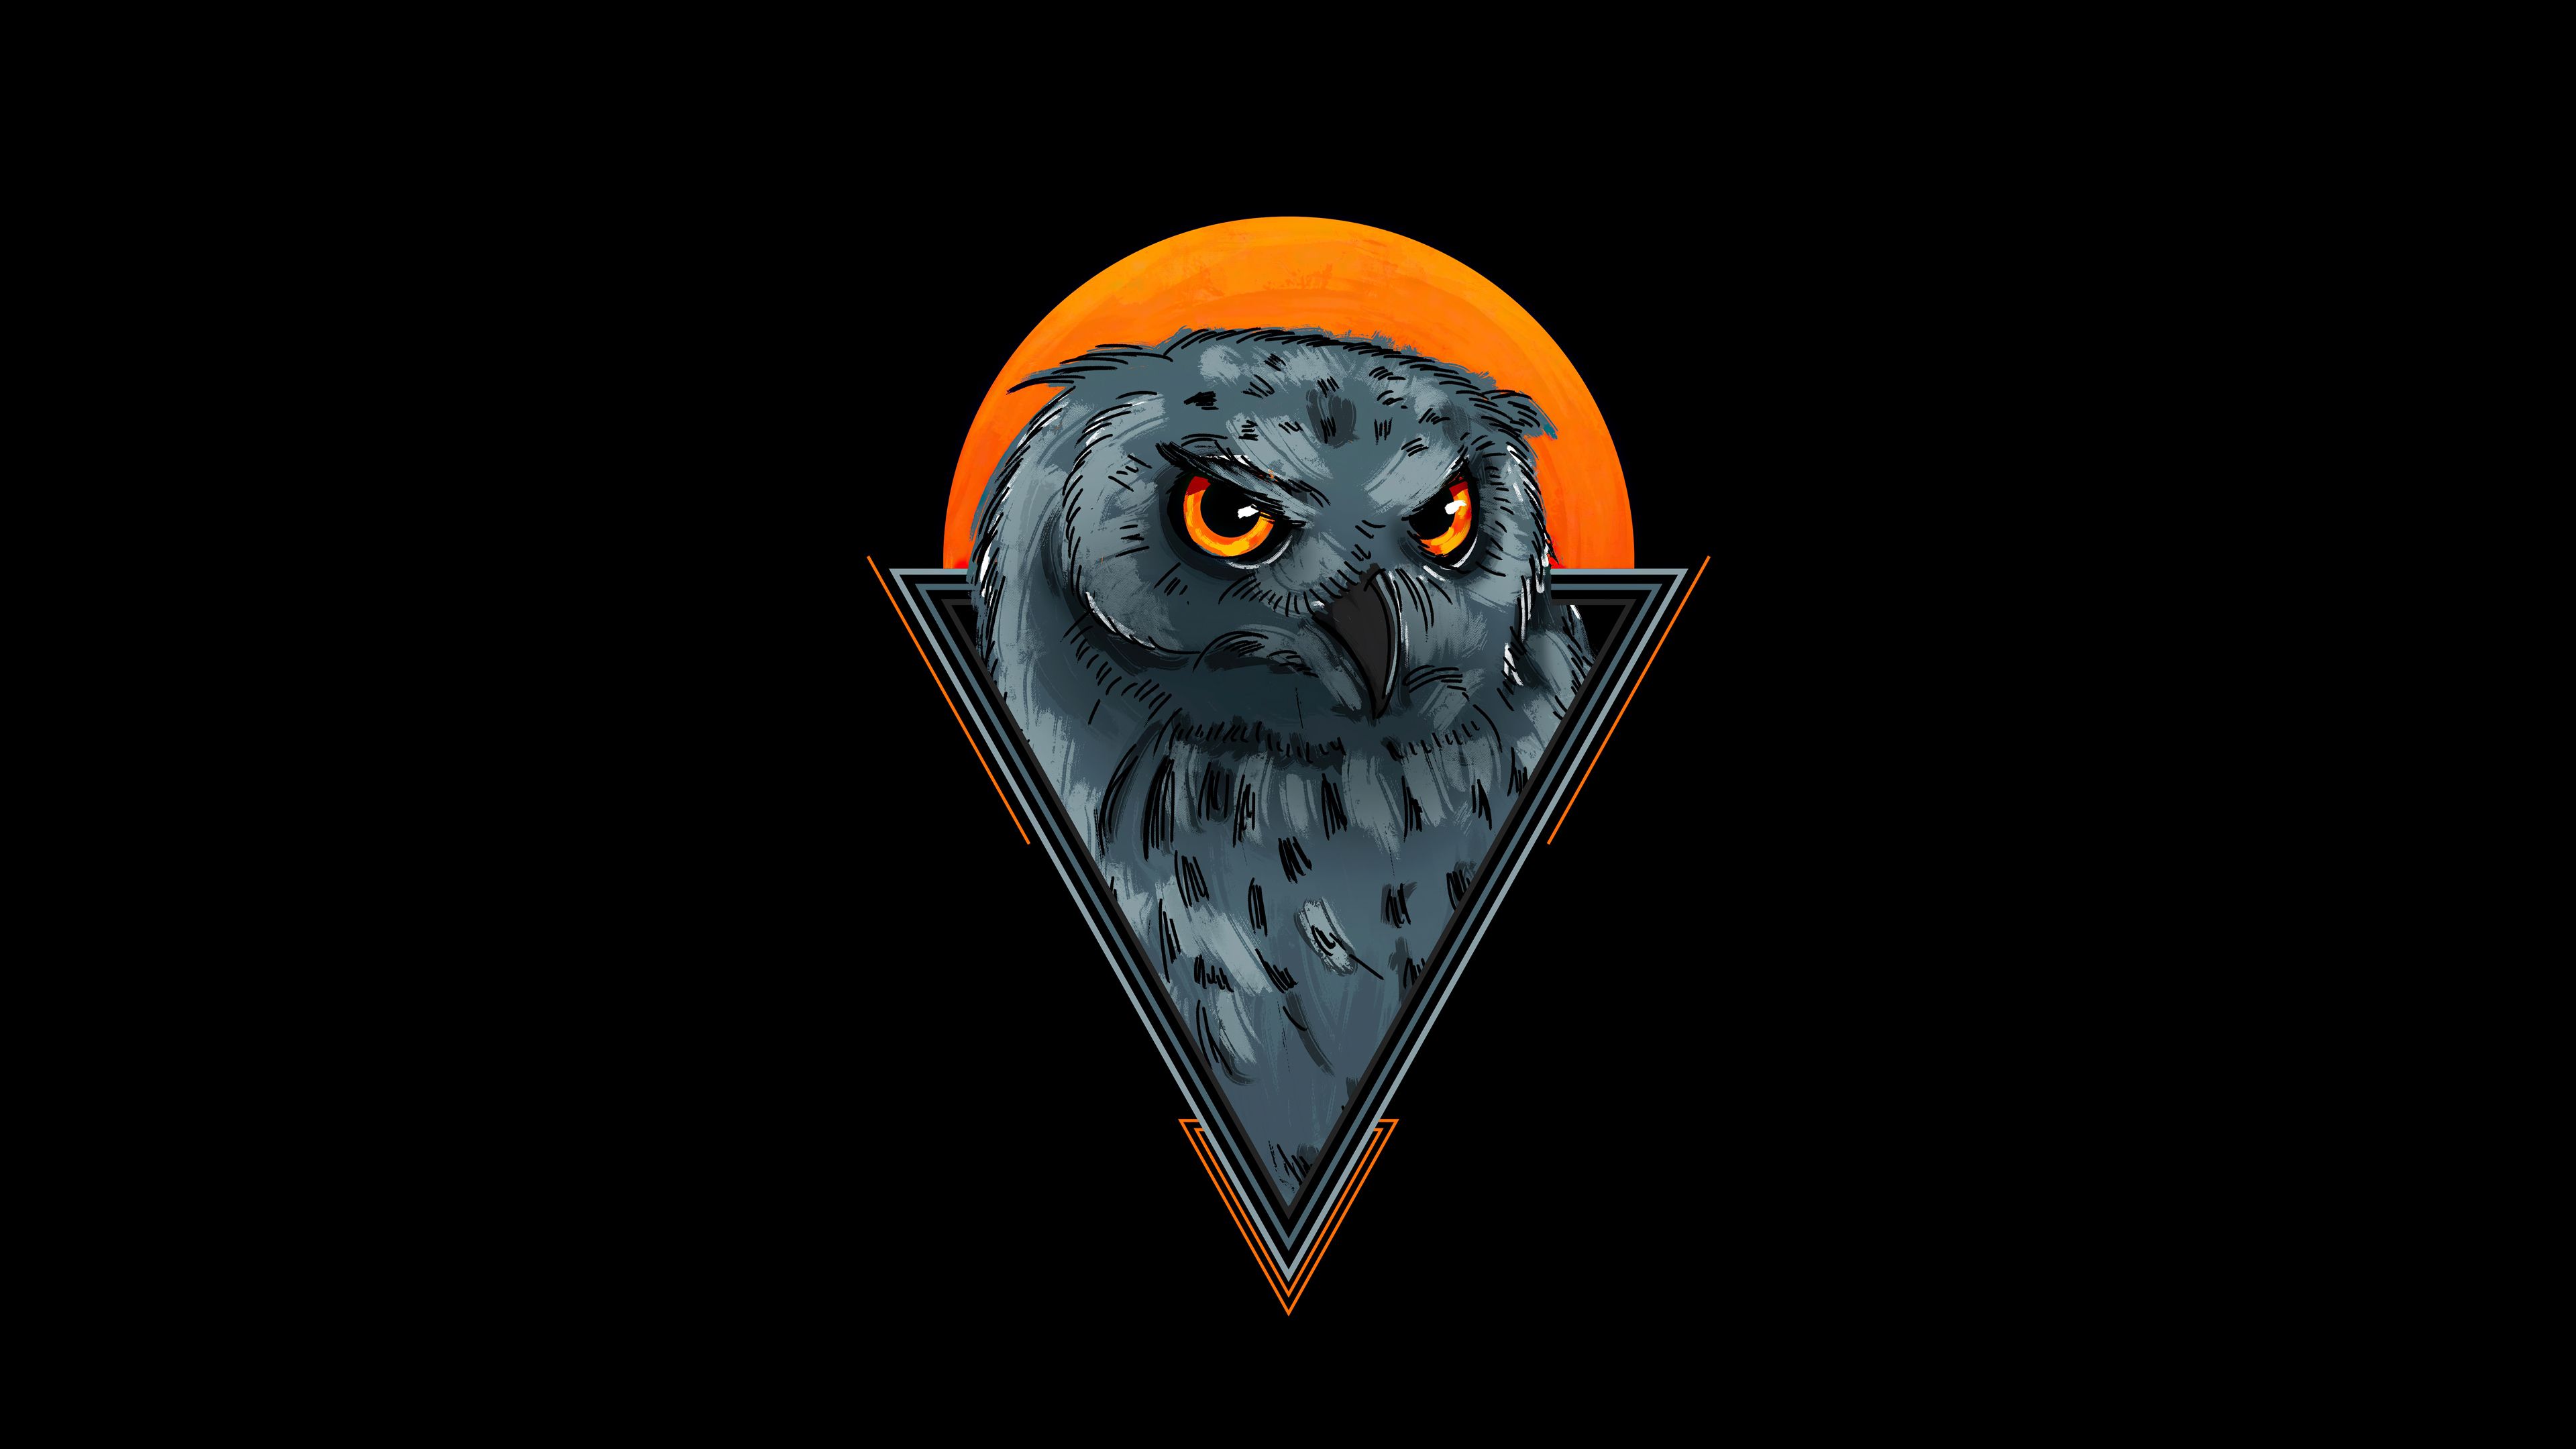 Owl Minimal 4k, HD Artist, 4k Wallpaper, Image, Background, Photo and Picture